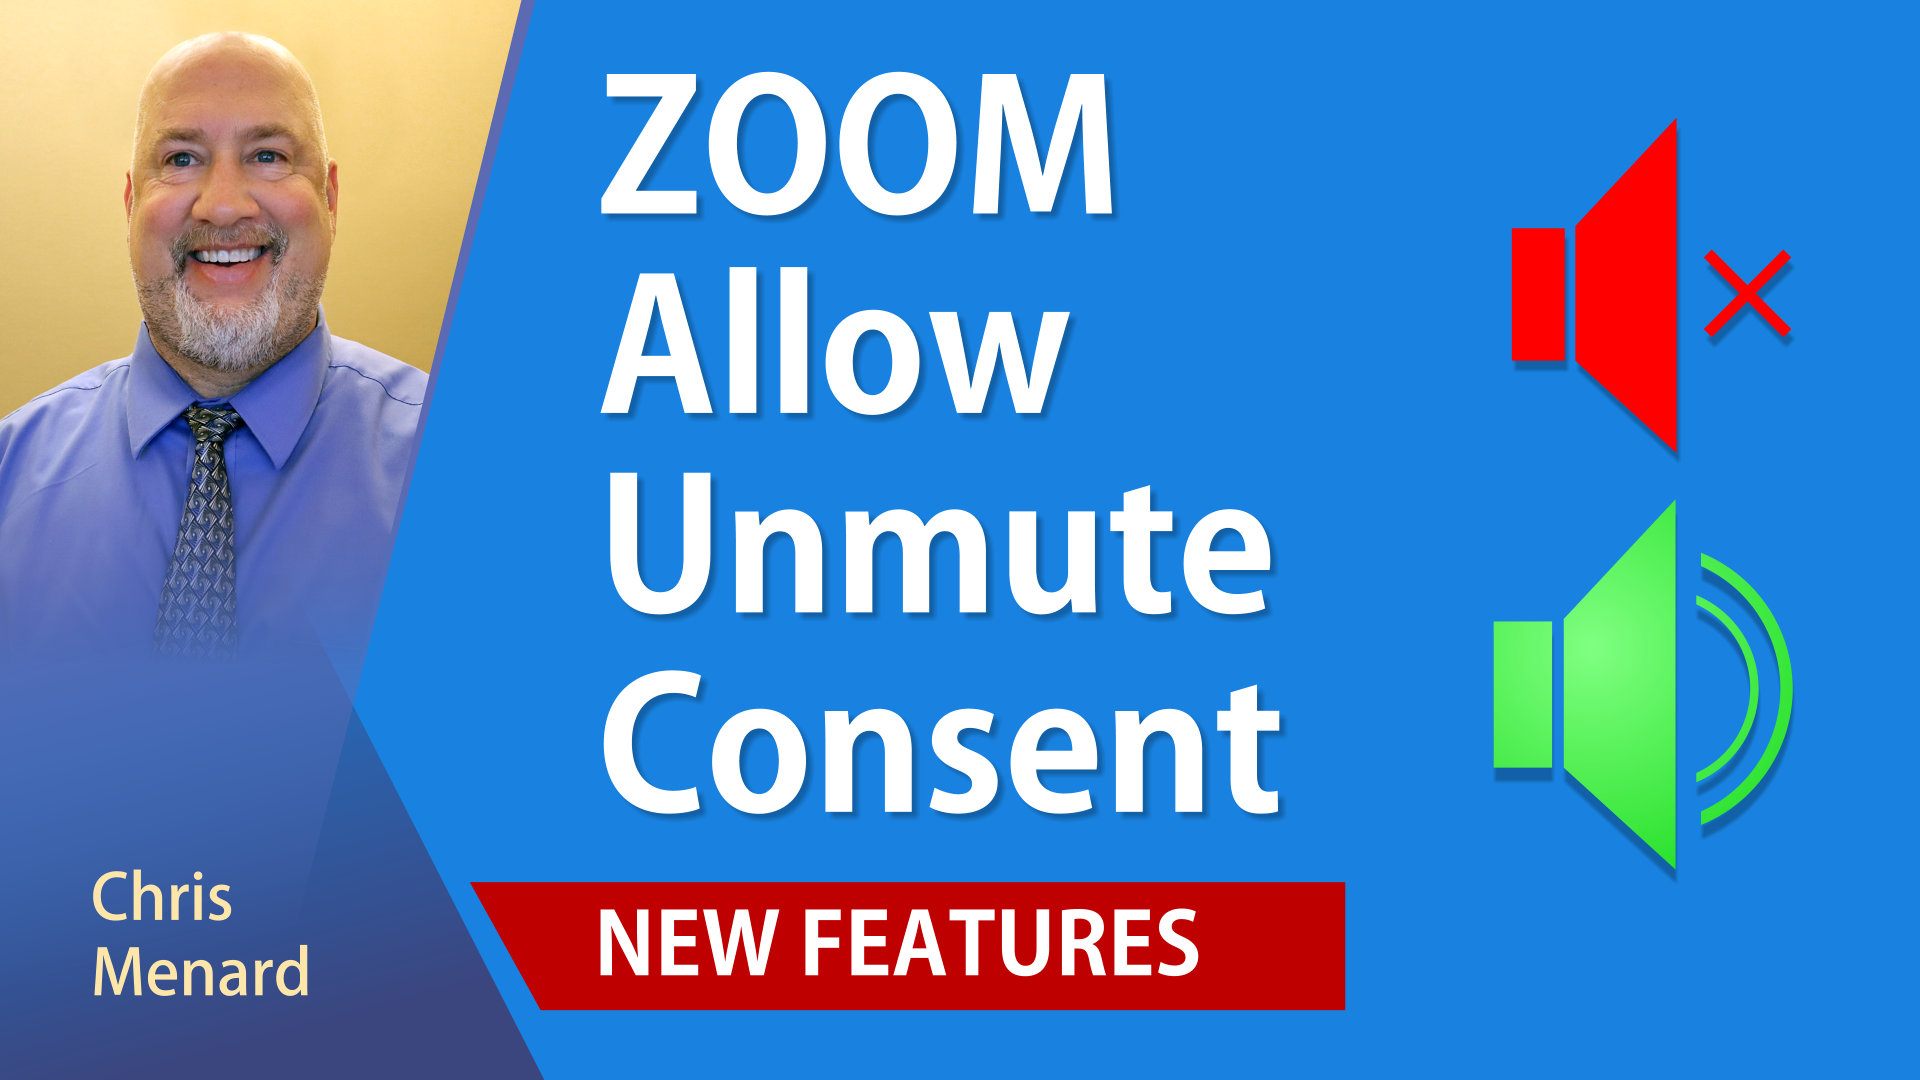 Zoom New Feature: Request consent to unmute participants